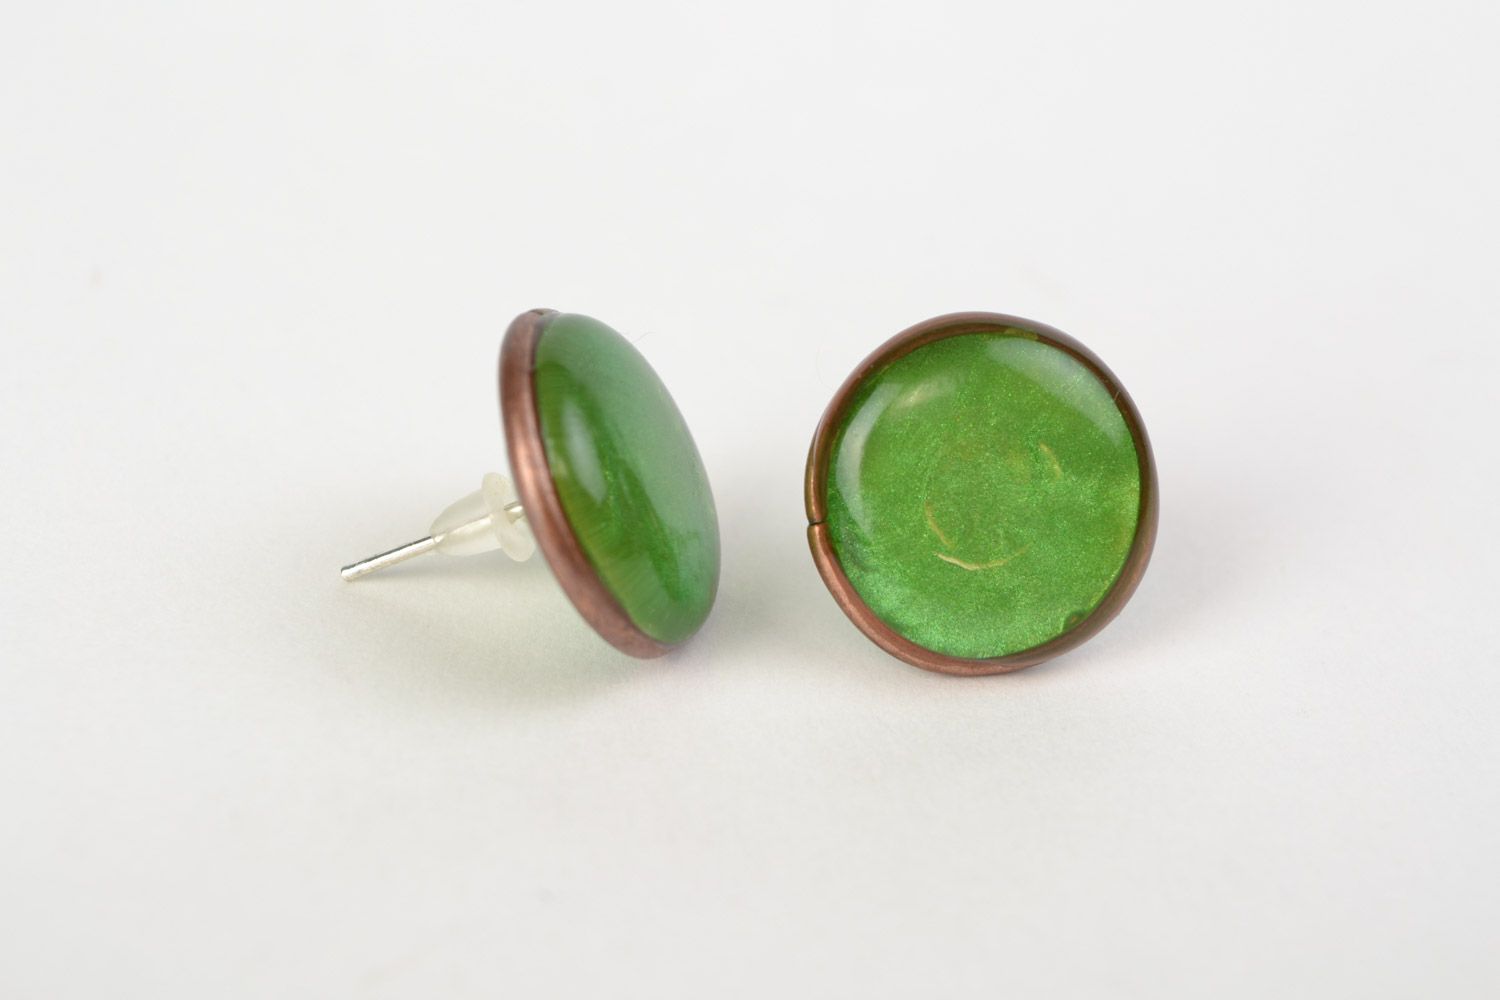 Handmade small epoxy resin stud earrings of round shape and green color photo 1